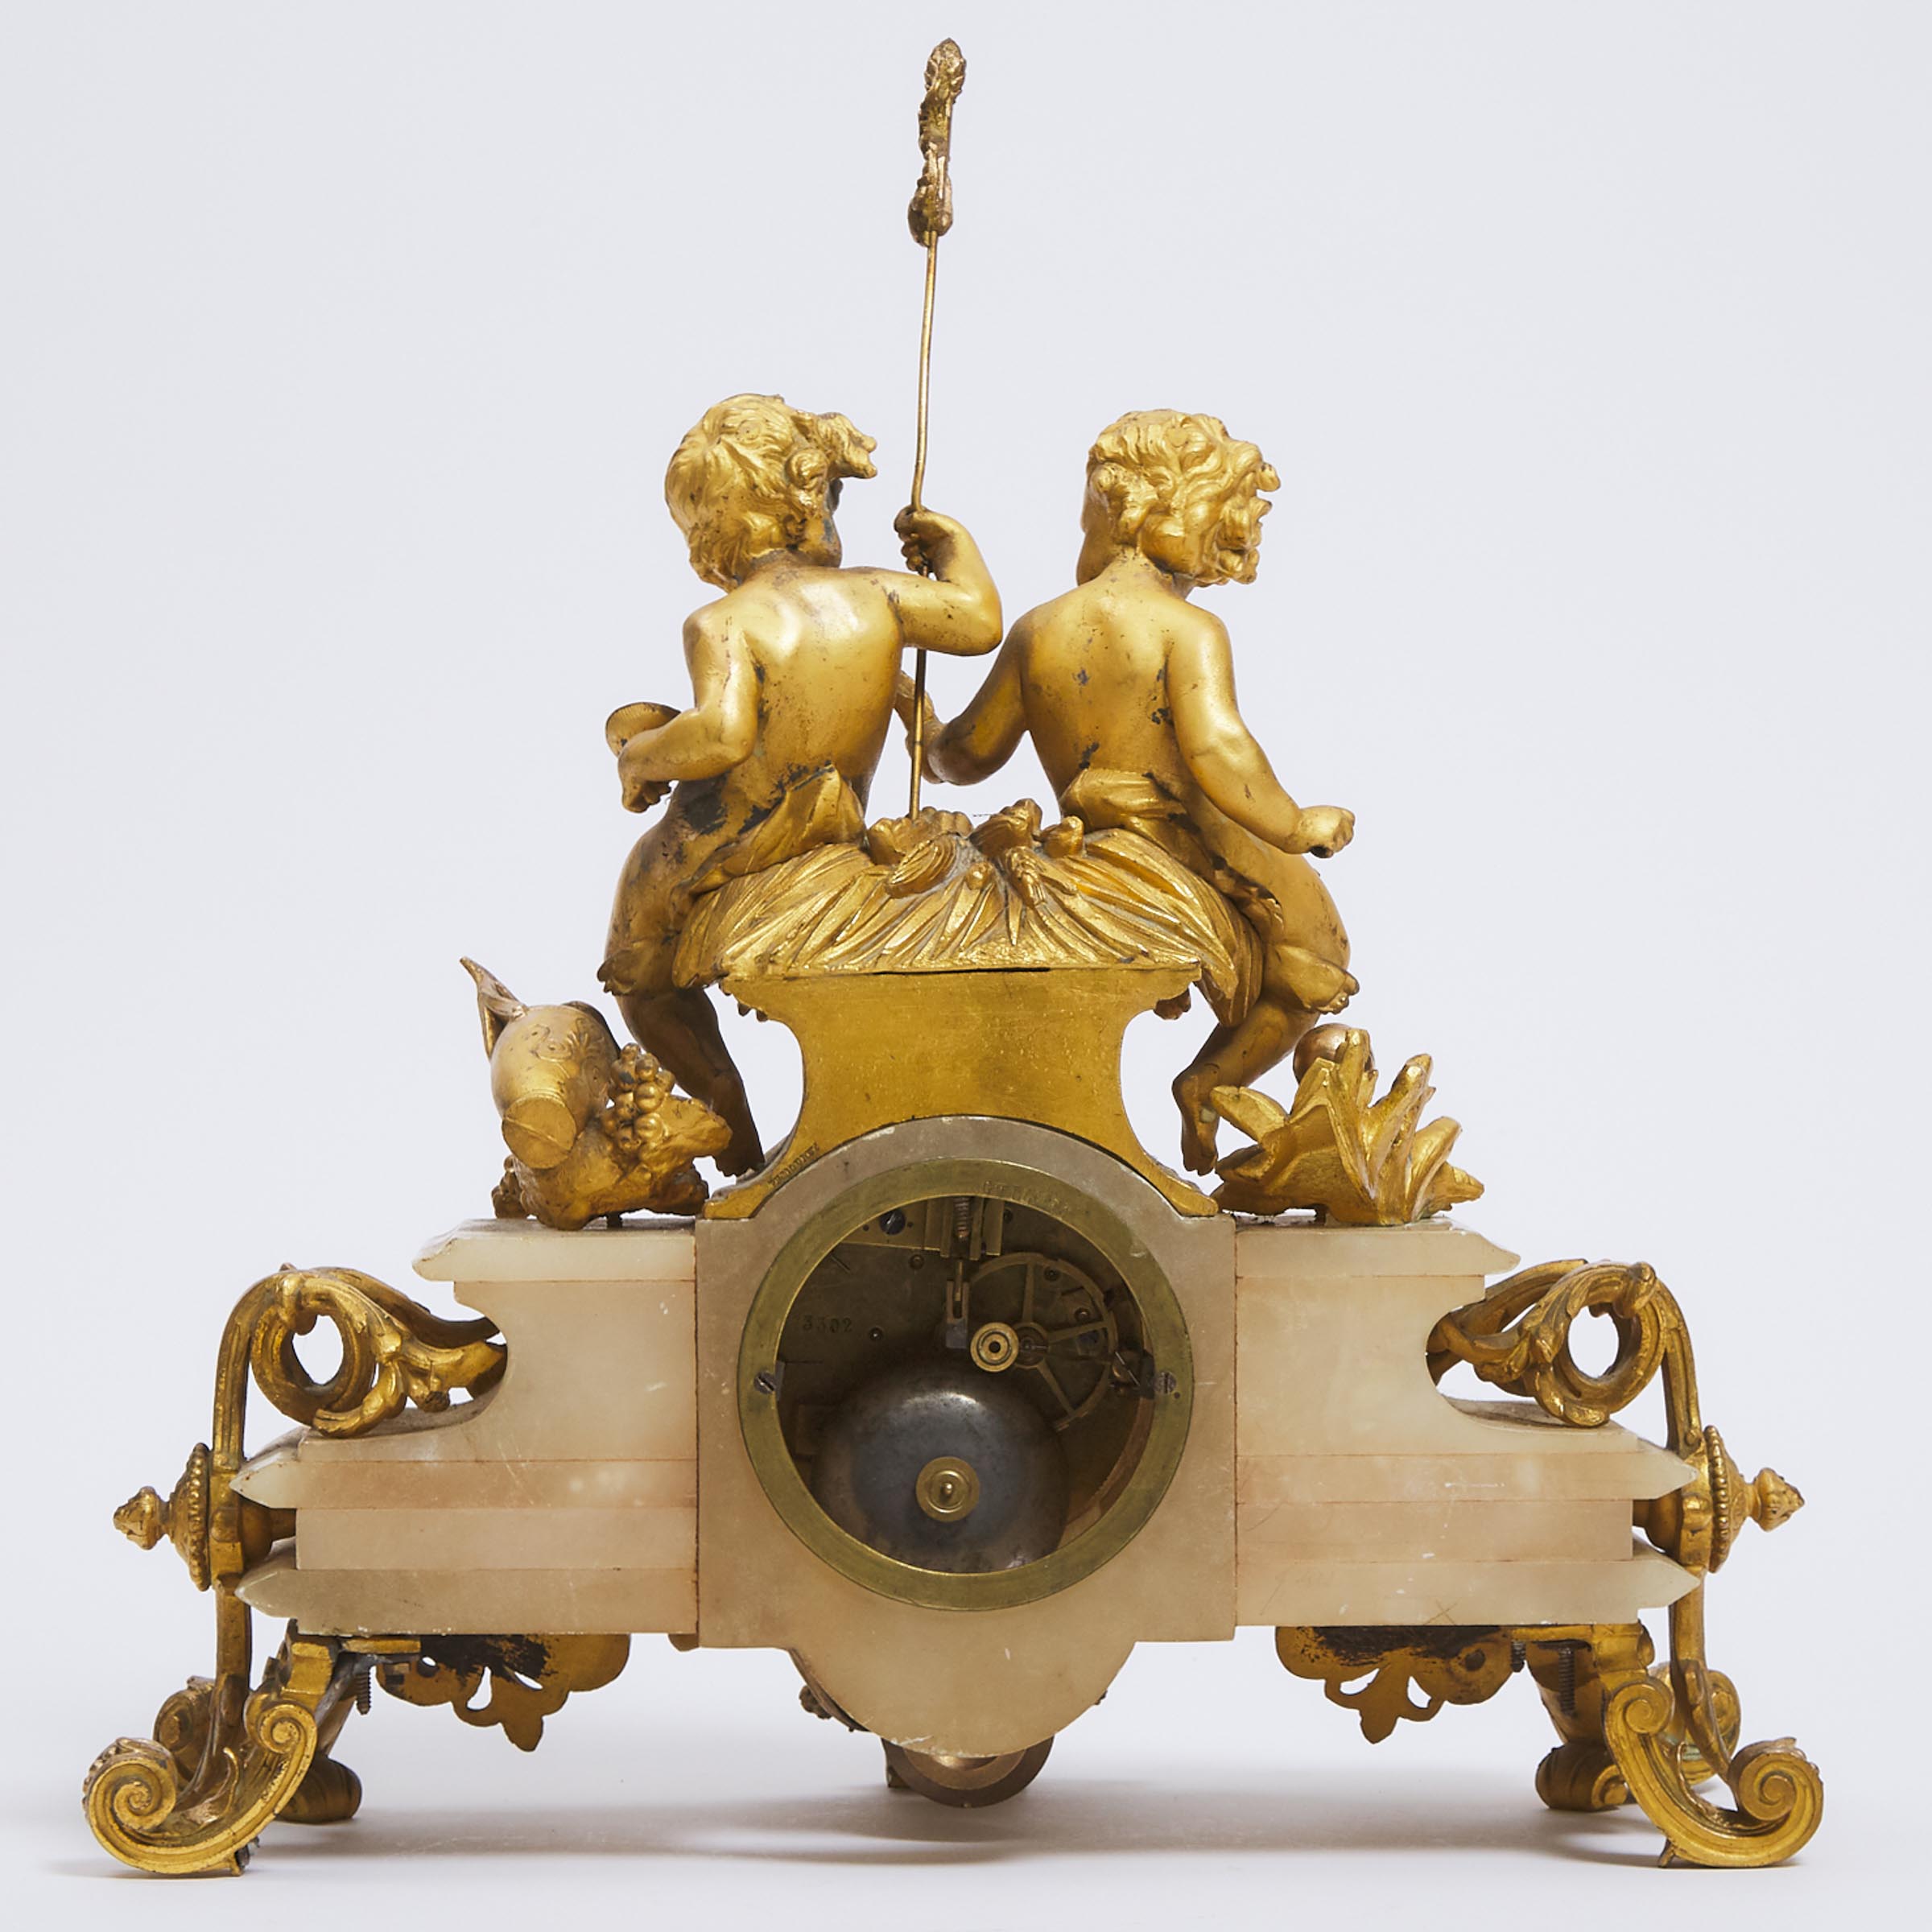 French Gilt Bronze and Alabaster Mantle Clock, mid 19th century